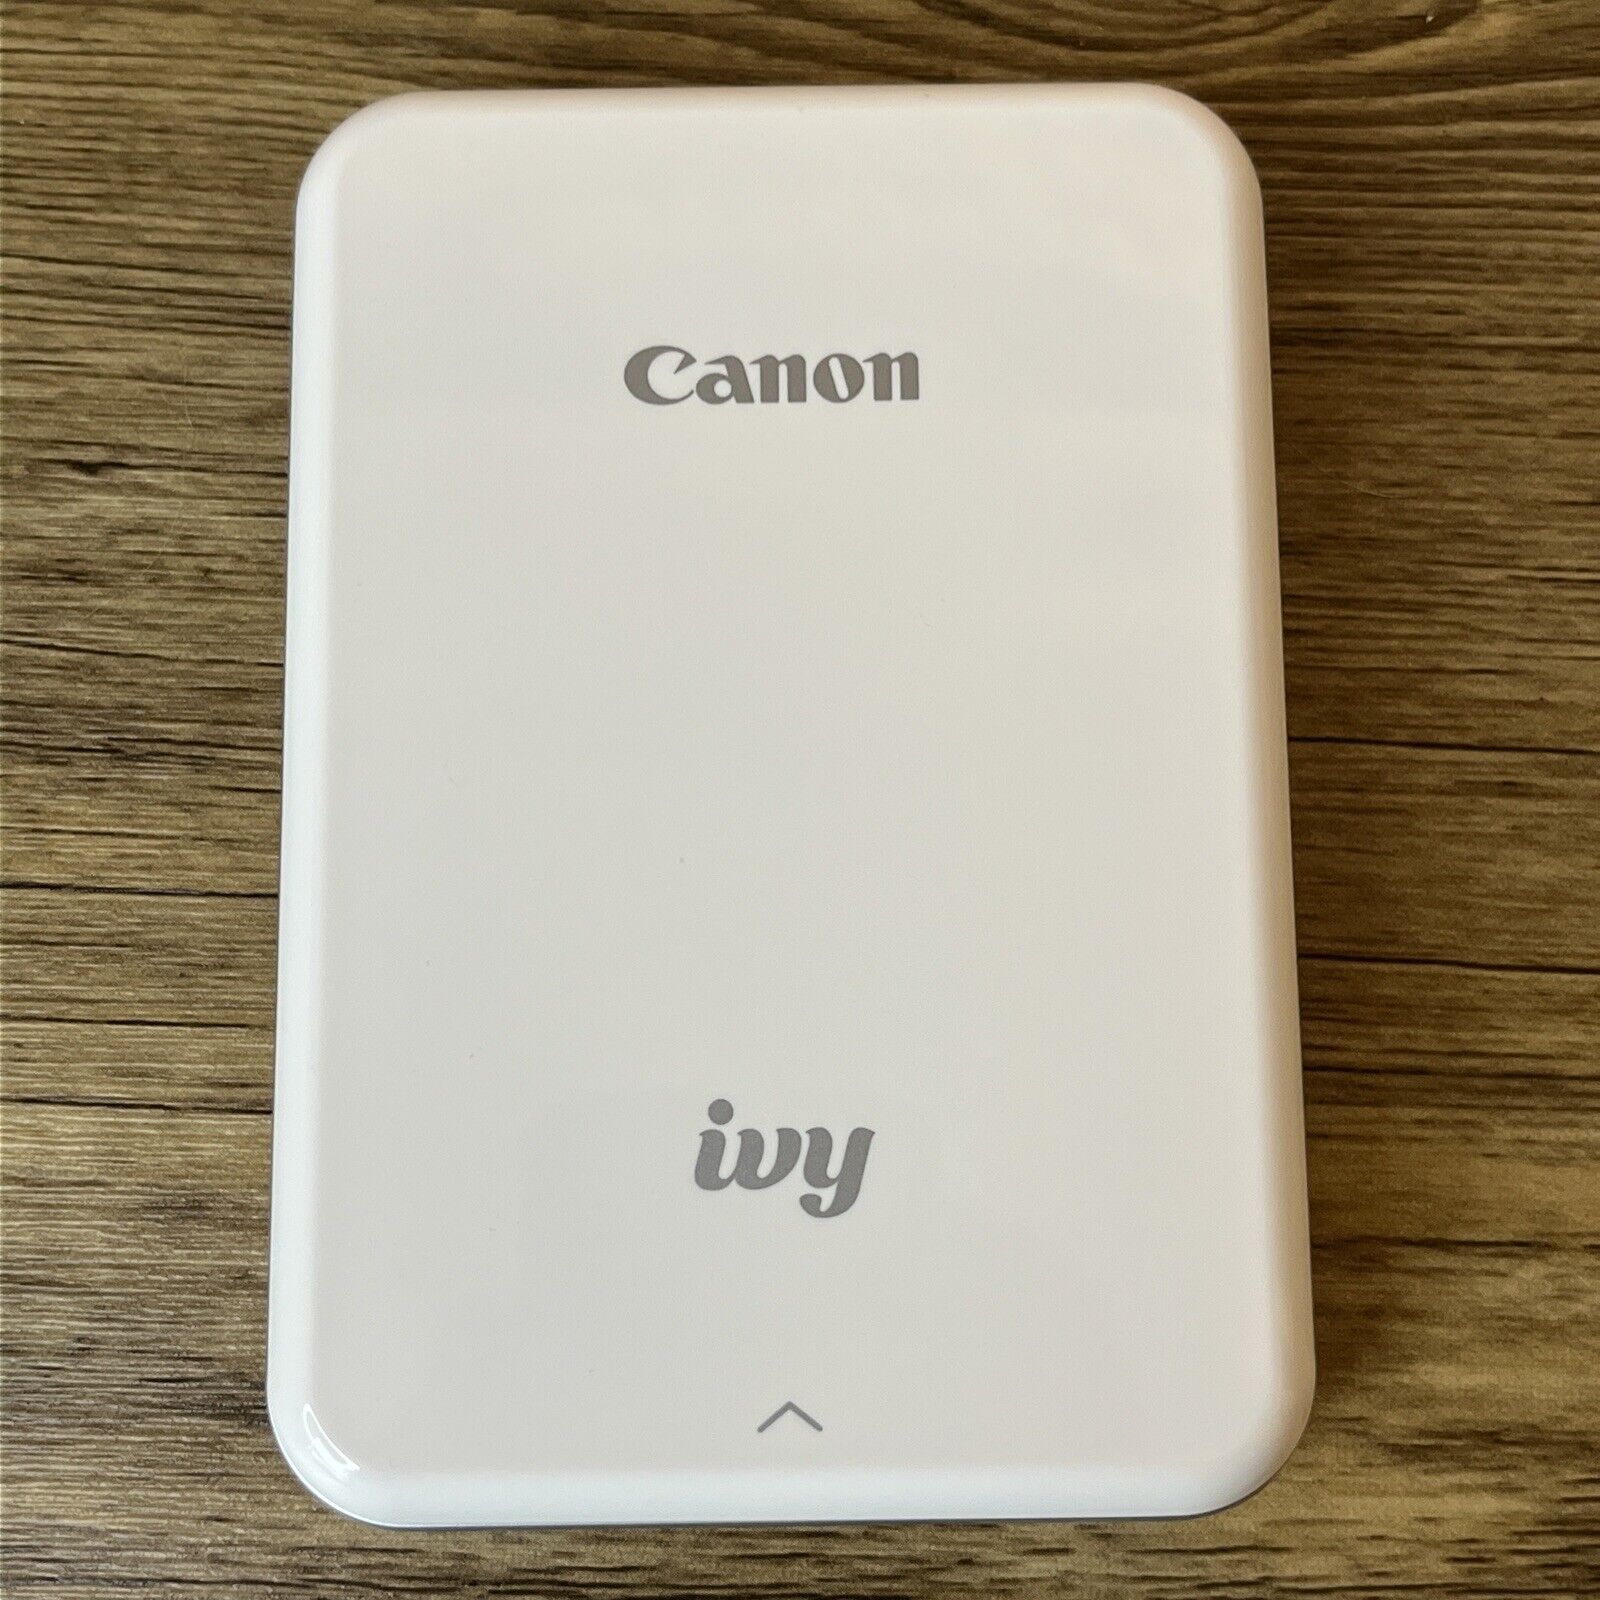 Canon Ivy Mini Mobile Photo Printer - Rose Gold Tested